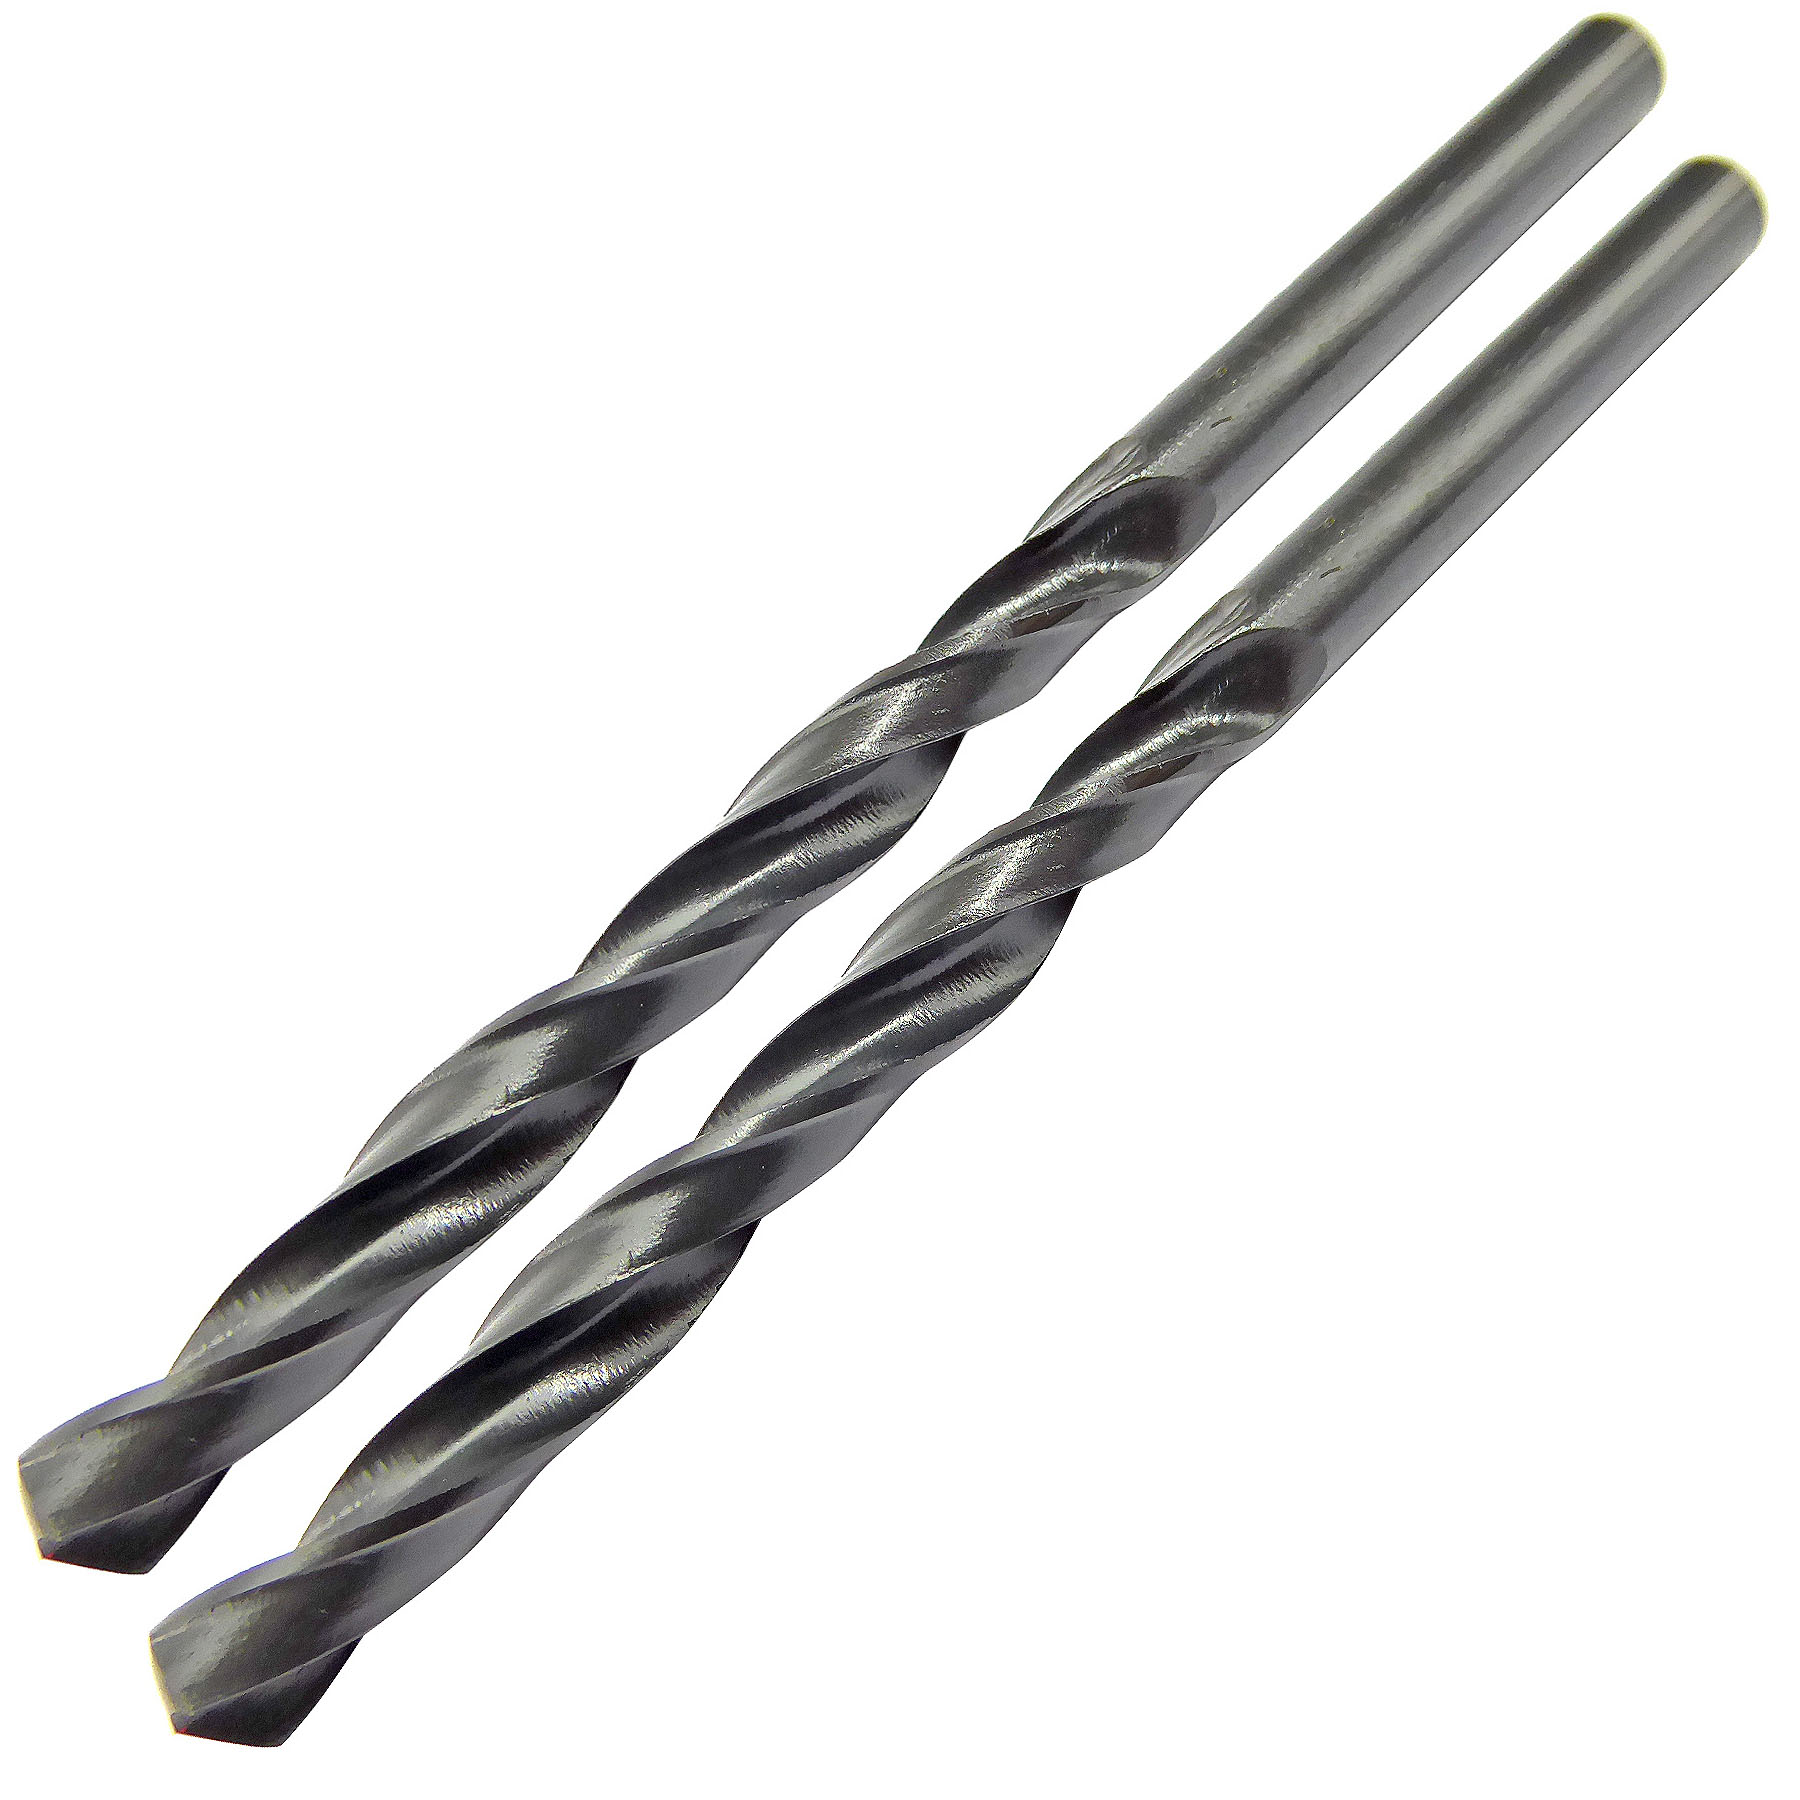 6.0mm x 93mm HSS Roll Forged Jobber Drill Pack of 2